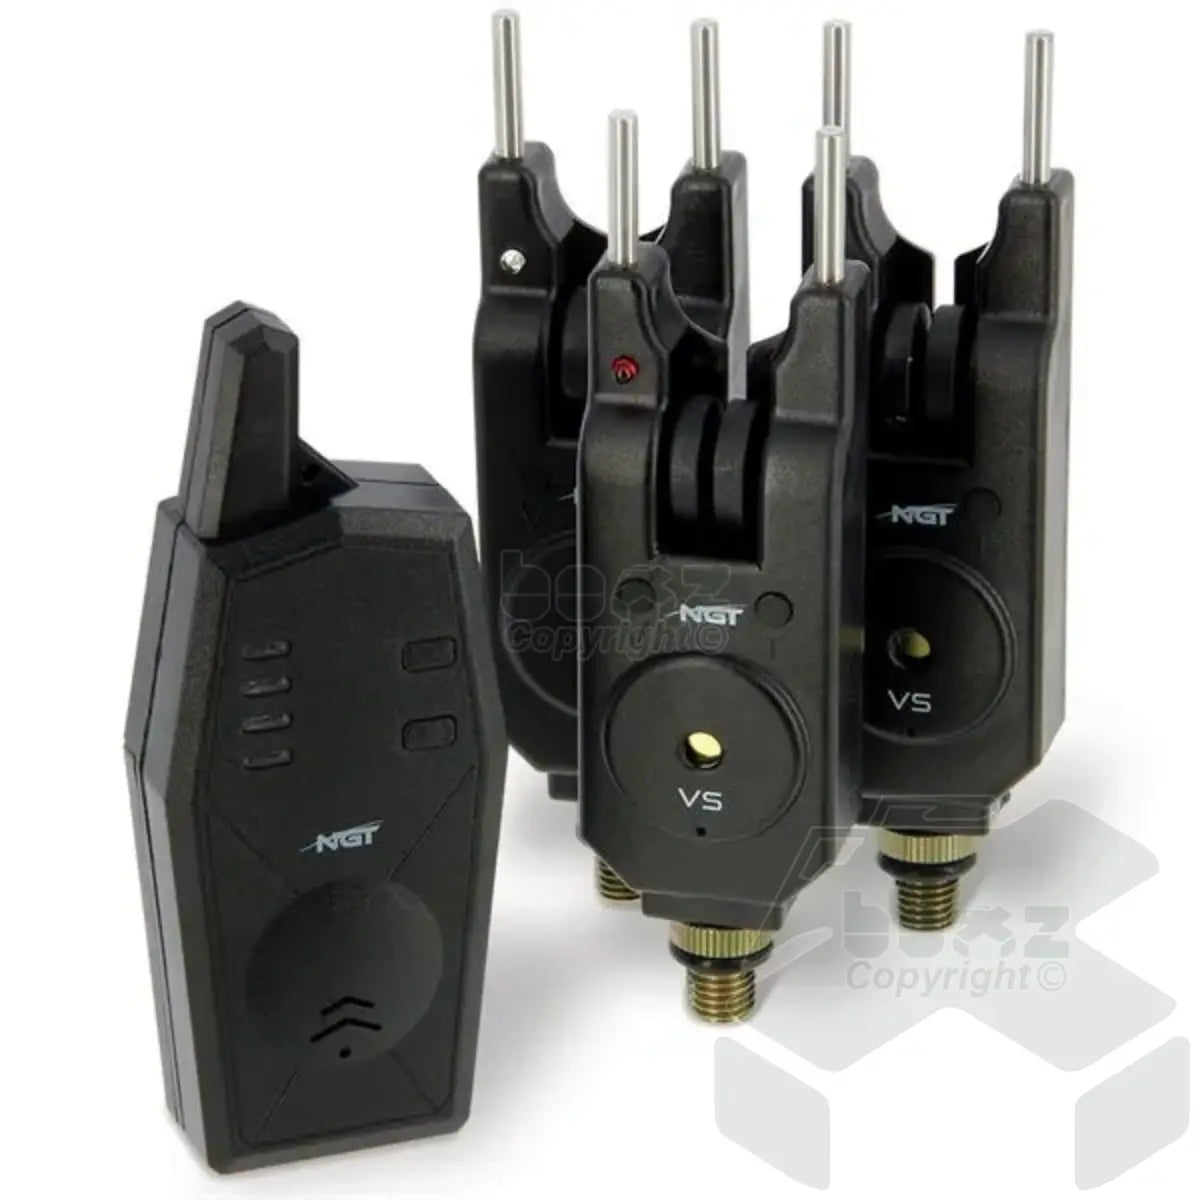 NGT VS 3pc Wireless Alarms - Adjustable Volume and Tone with Receiver